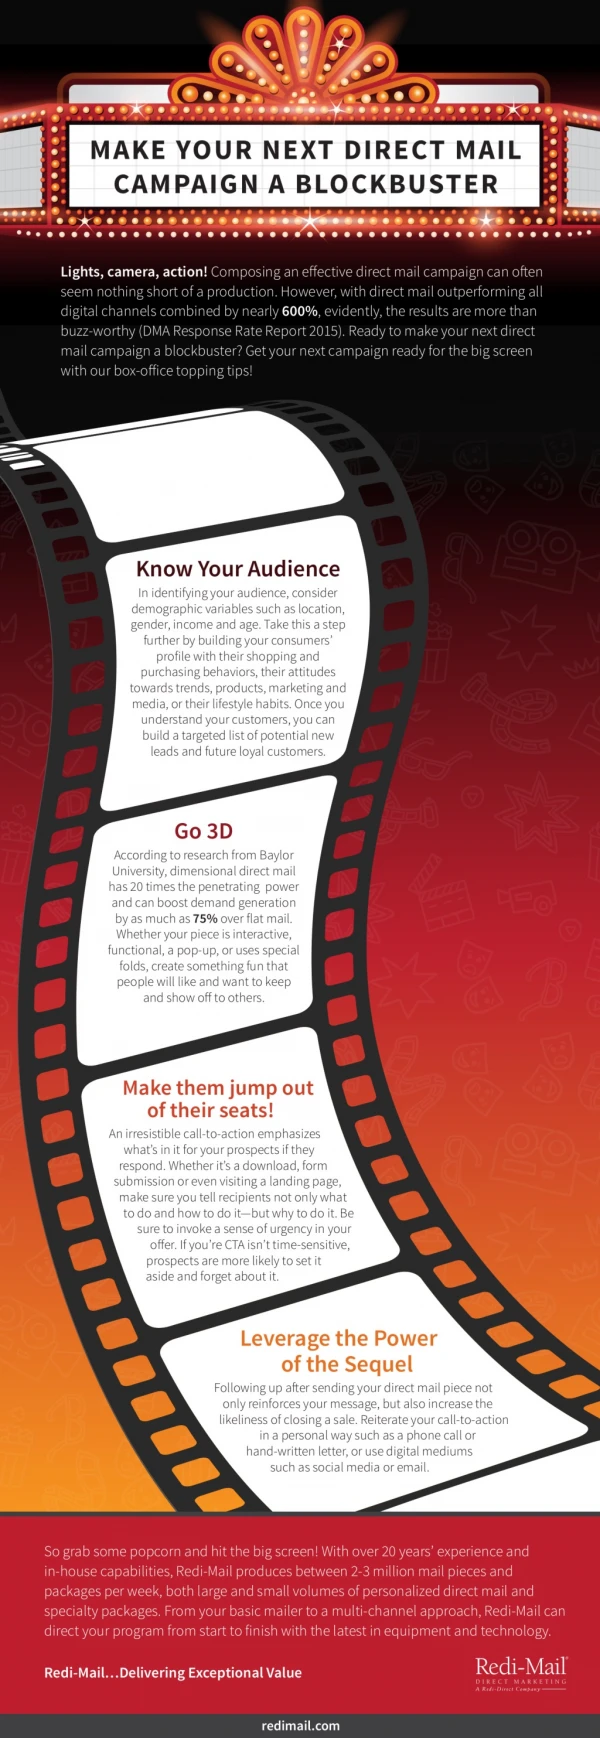 Make Your Next Direct Mail Campaign A Blockbuster